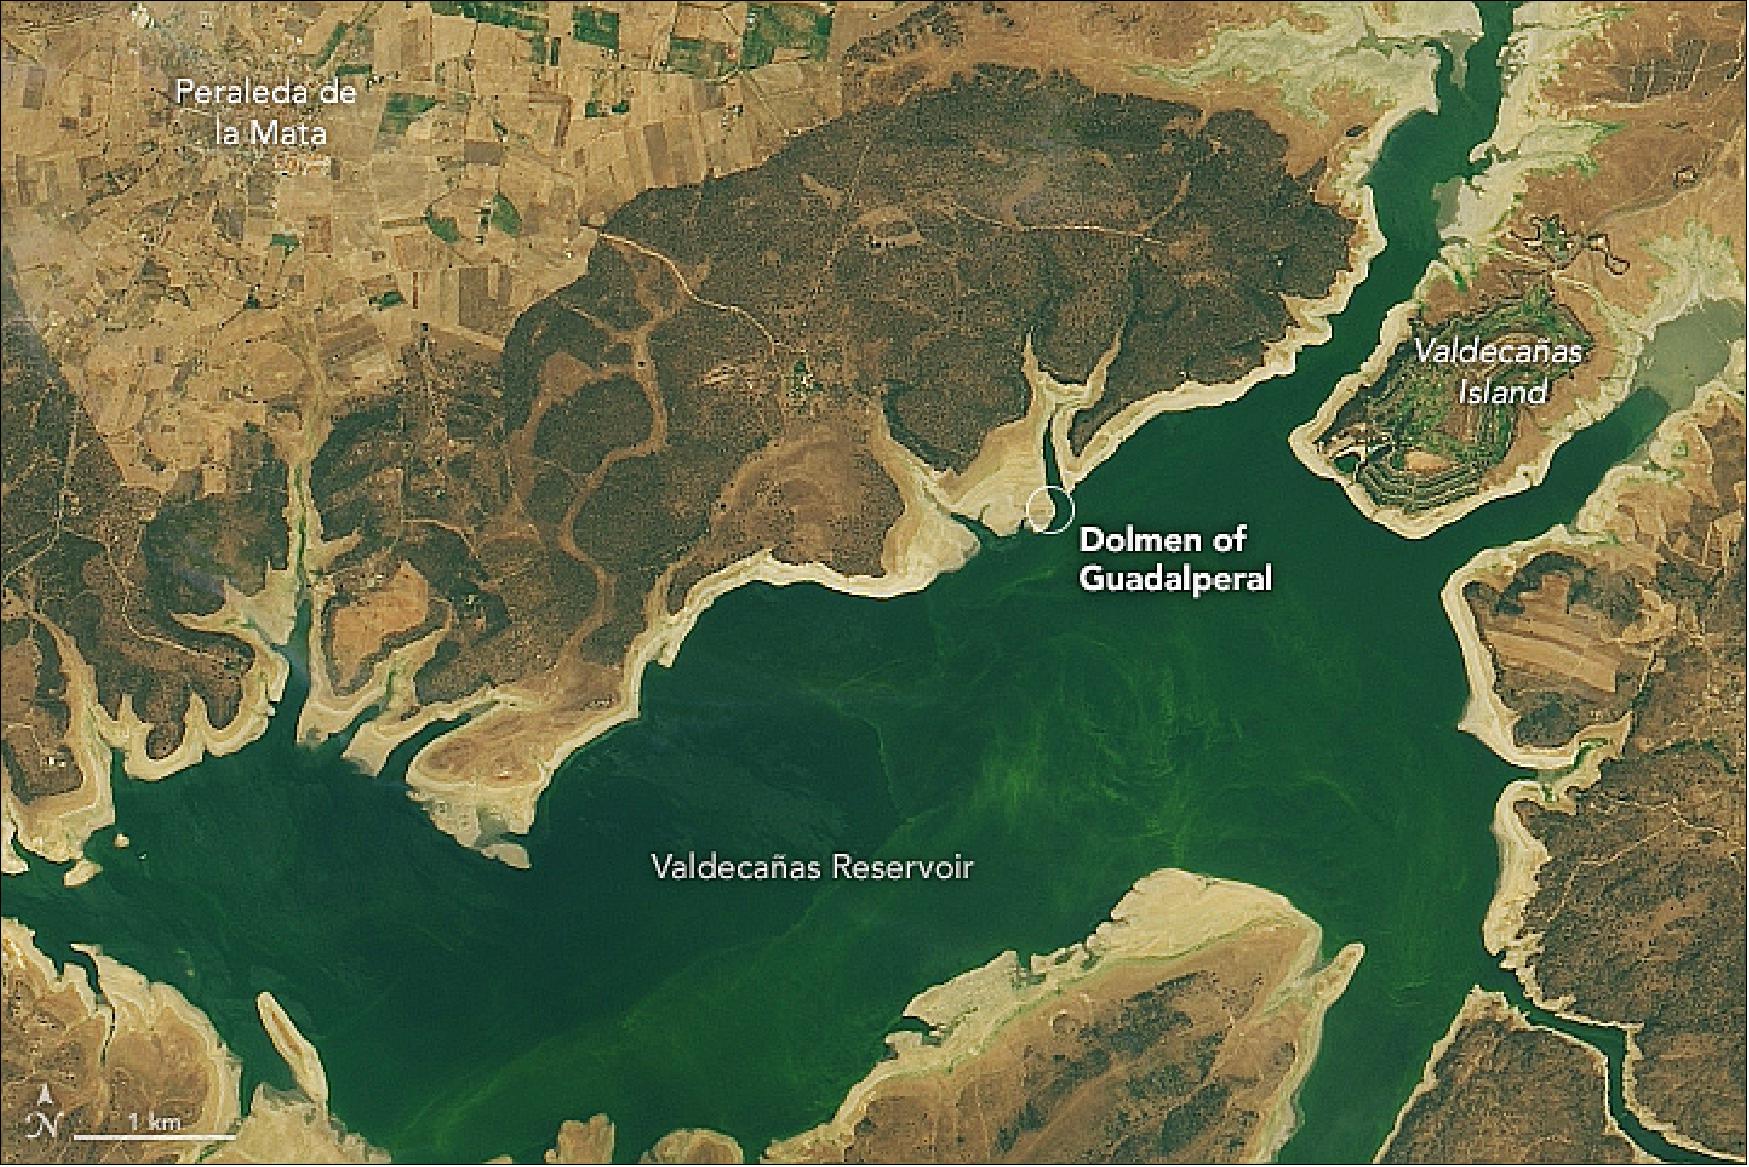 Figure 32: The Dolmen de Guadalperal resurfaced after five decades underwater. OLI on Landsat-8 acquired this image on 25 July 2019. Note the changing water levels and the widening of the tan ring around the shoreline; these lighter colored sediments are the recently exposed lake bottom. A circle marks the area where the remains of the Dolmen of Guadalperal are said to appear (image credit: NASA Earth Observatory, image by Lauren Dauphin, using Landsat data from the U.S. Geological Survey, story by Kasha Patel)